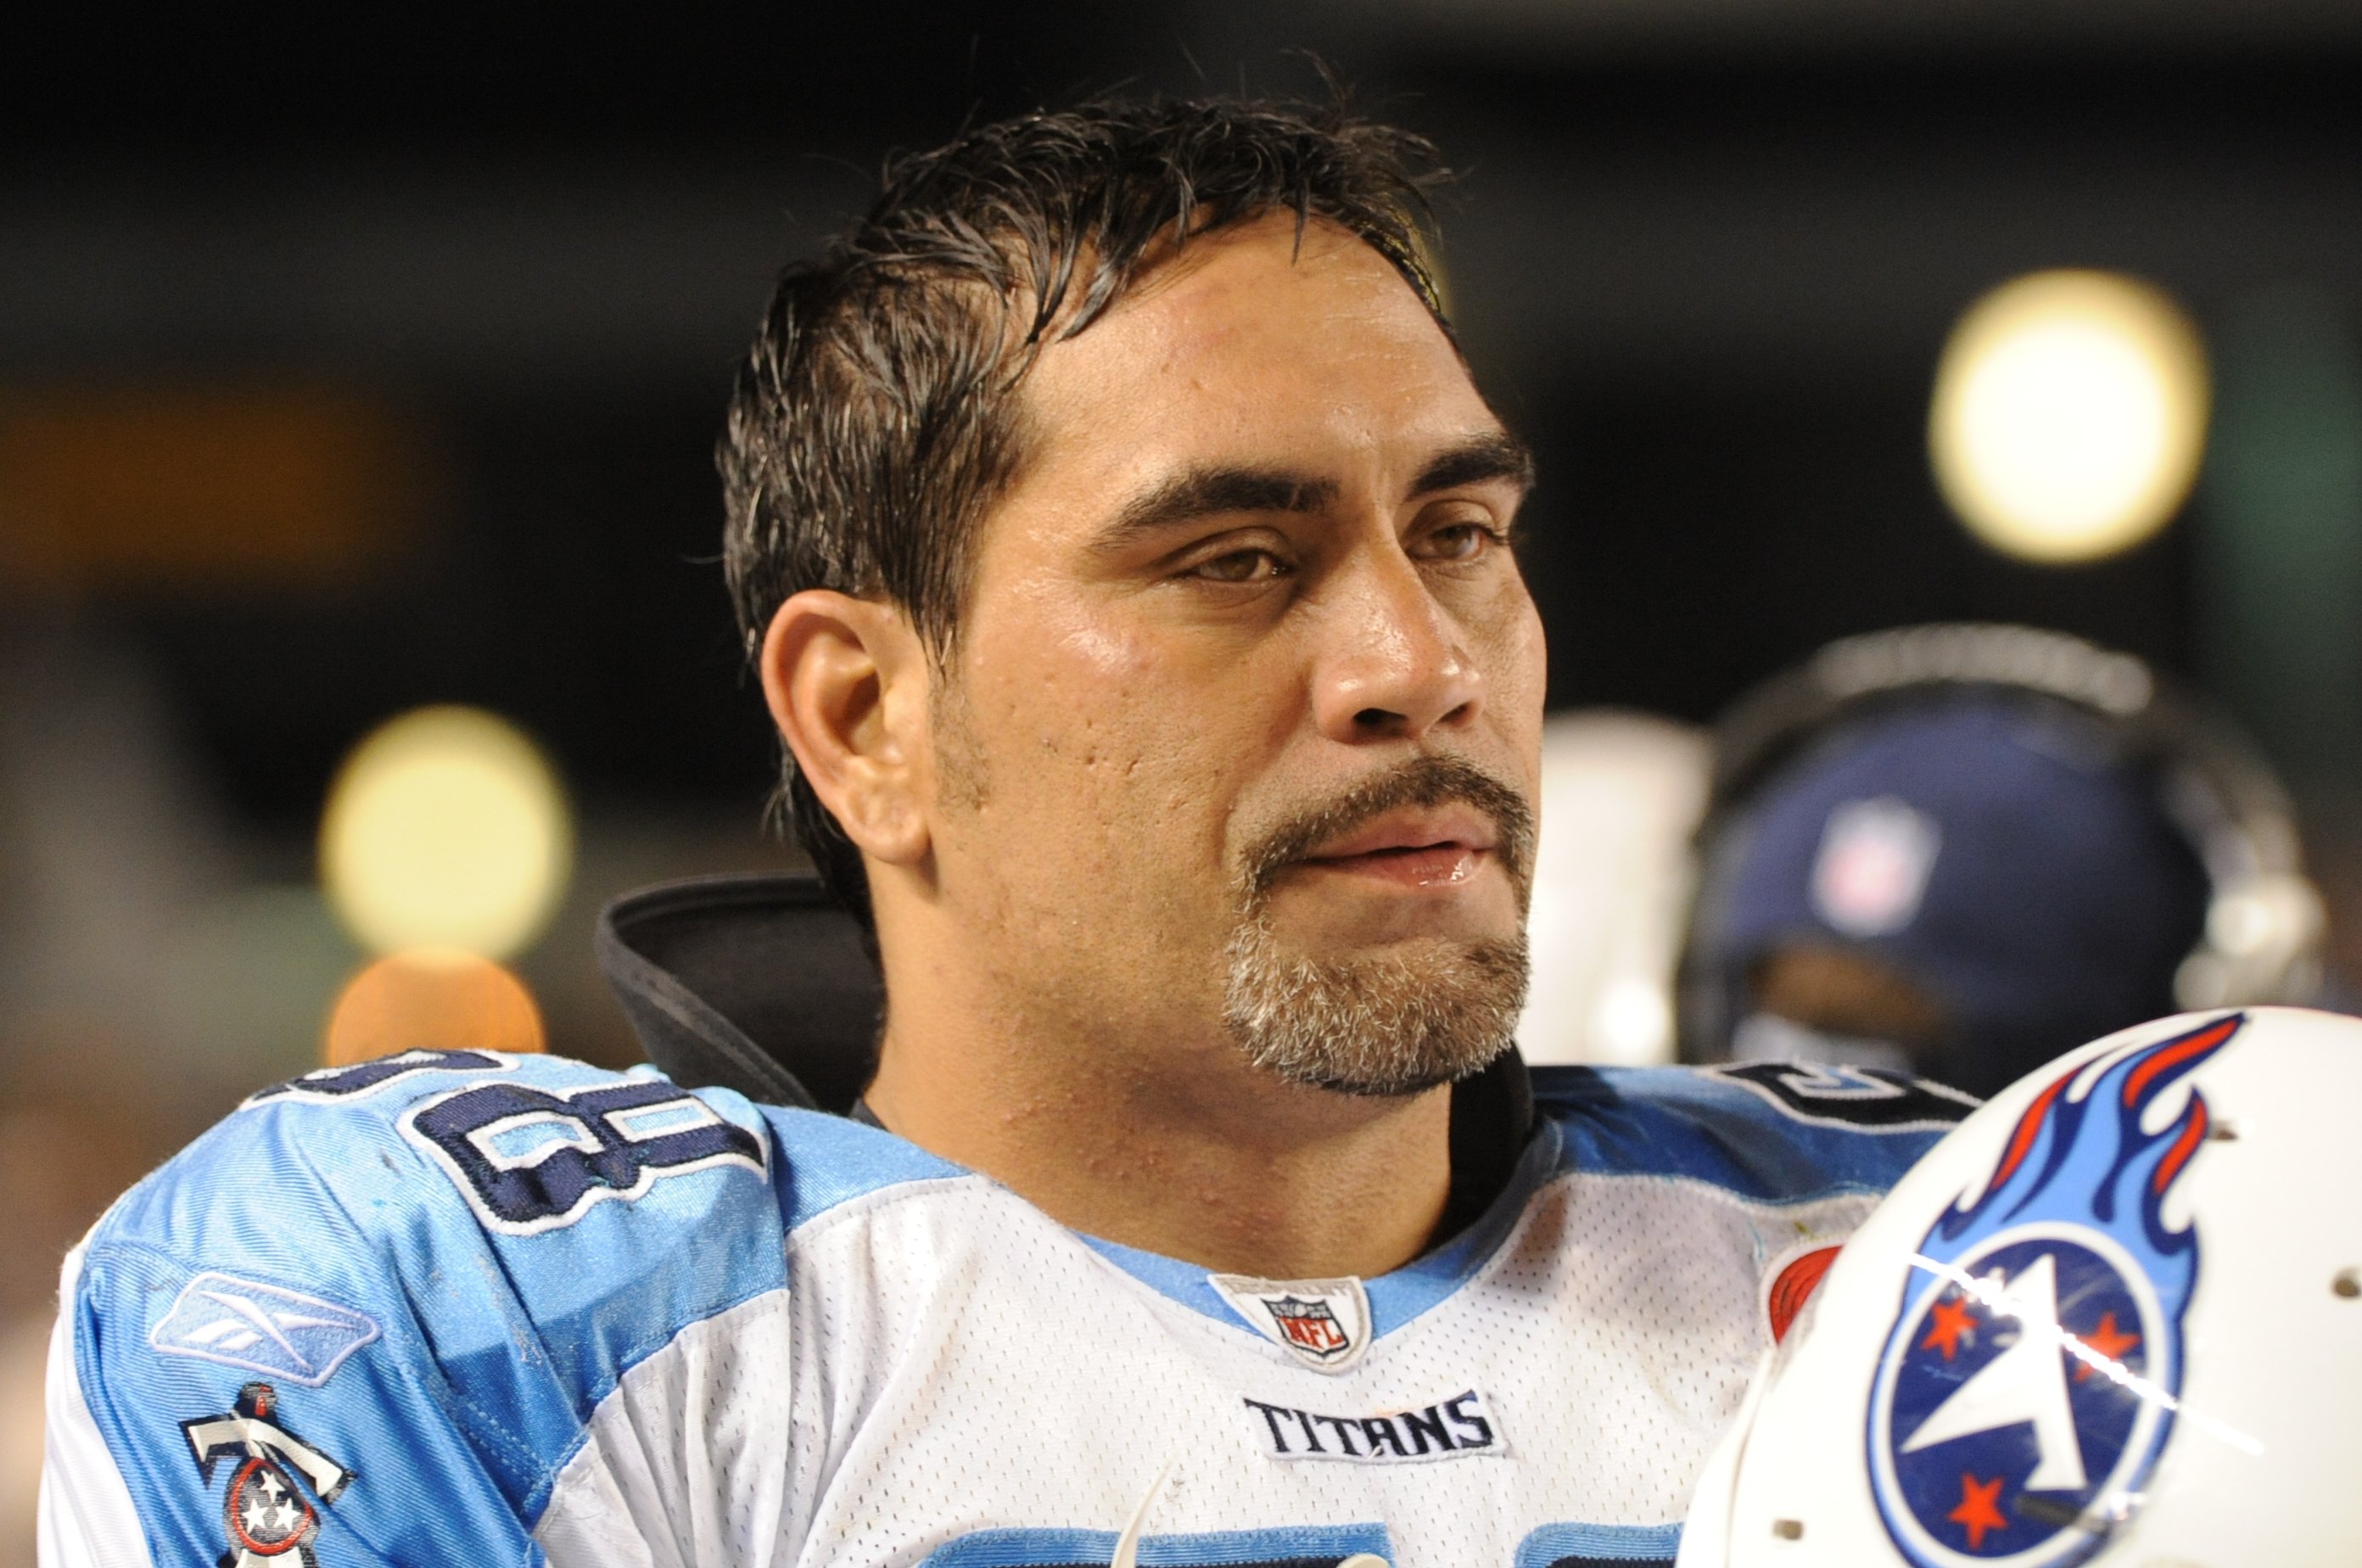 Kevin Mawae looking on from the sideline